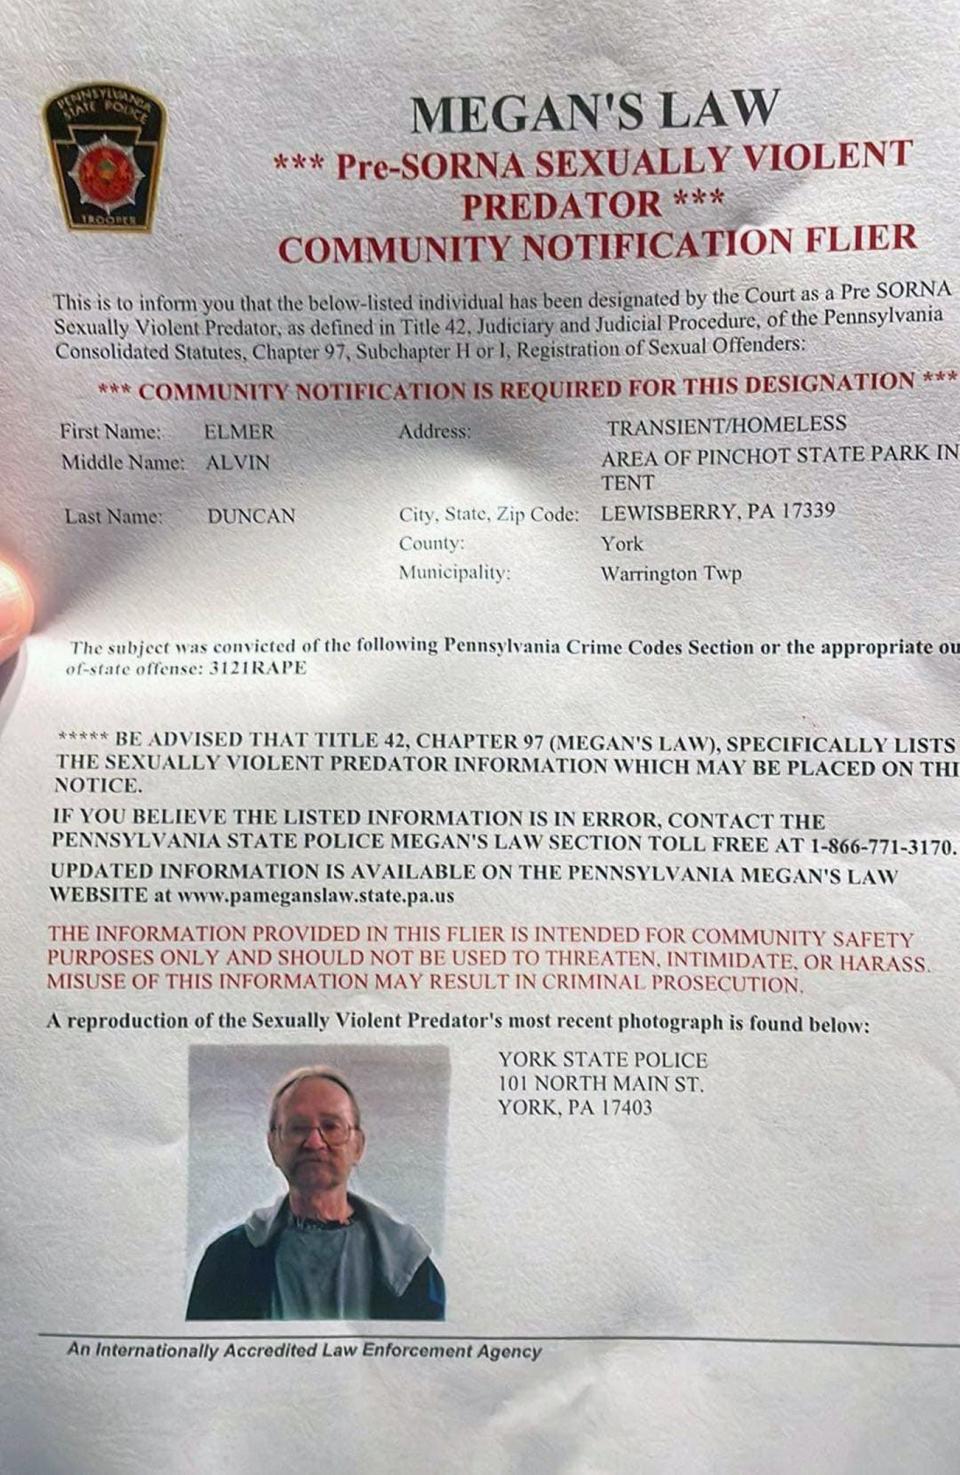 State Police circulated this flier in the area around Pinchot State Park.